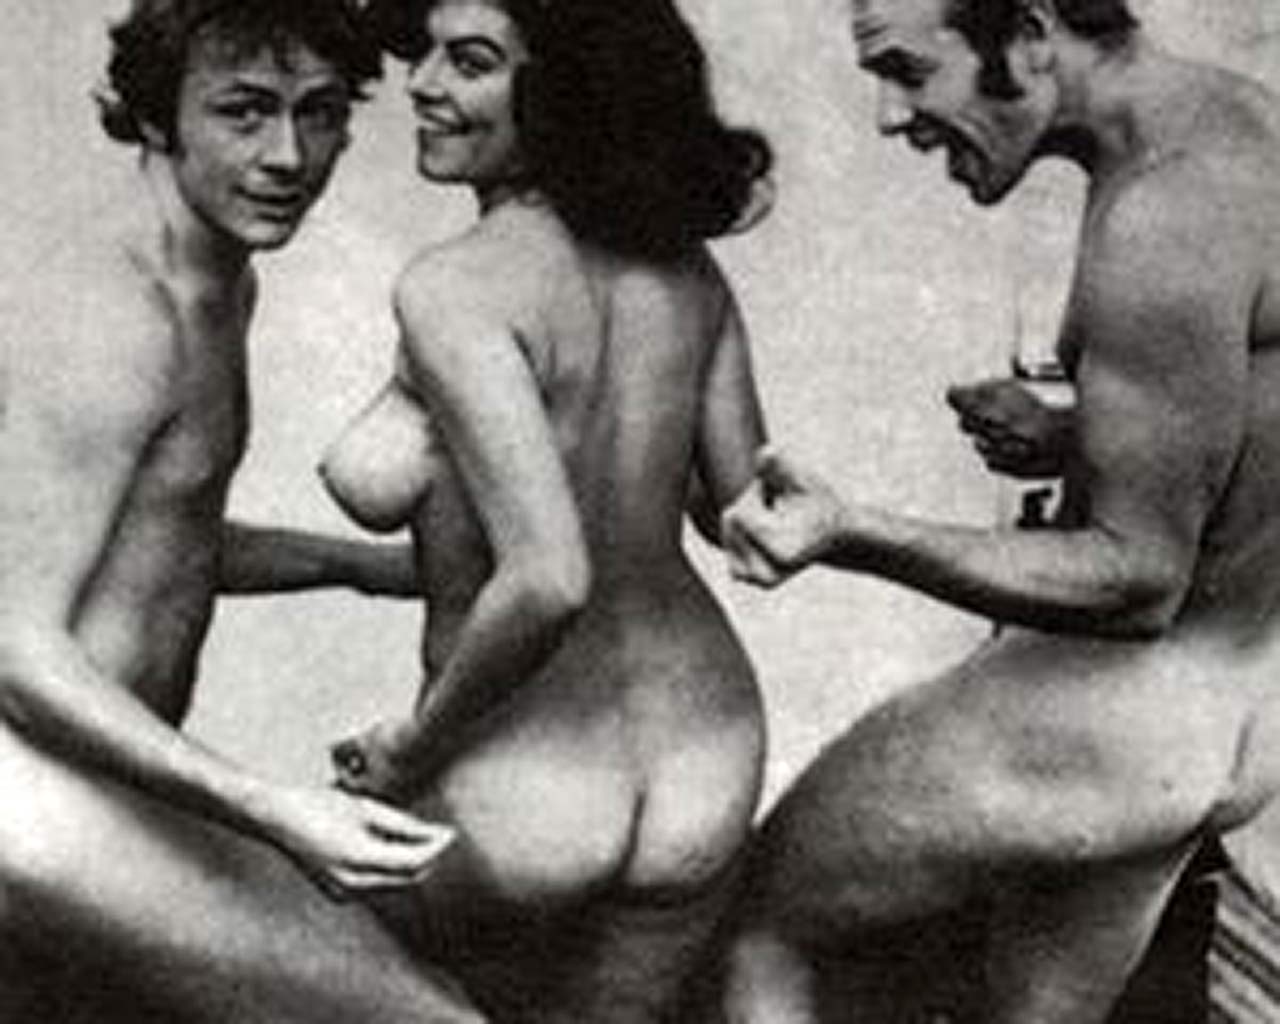 Adrienne of naked barbeau pictures adrienne barbeau